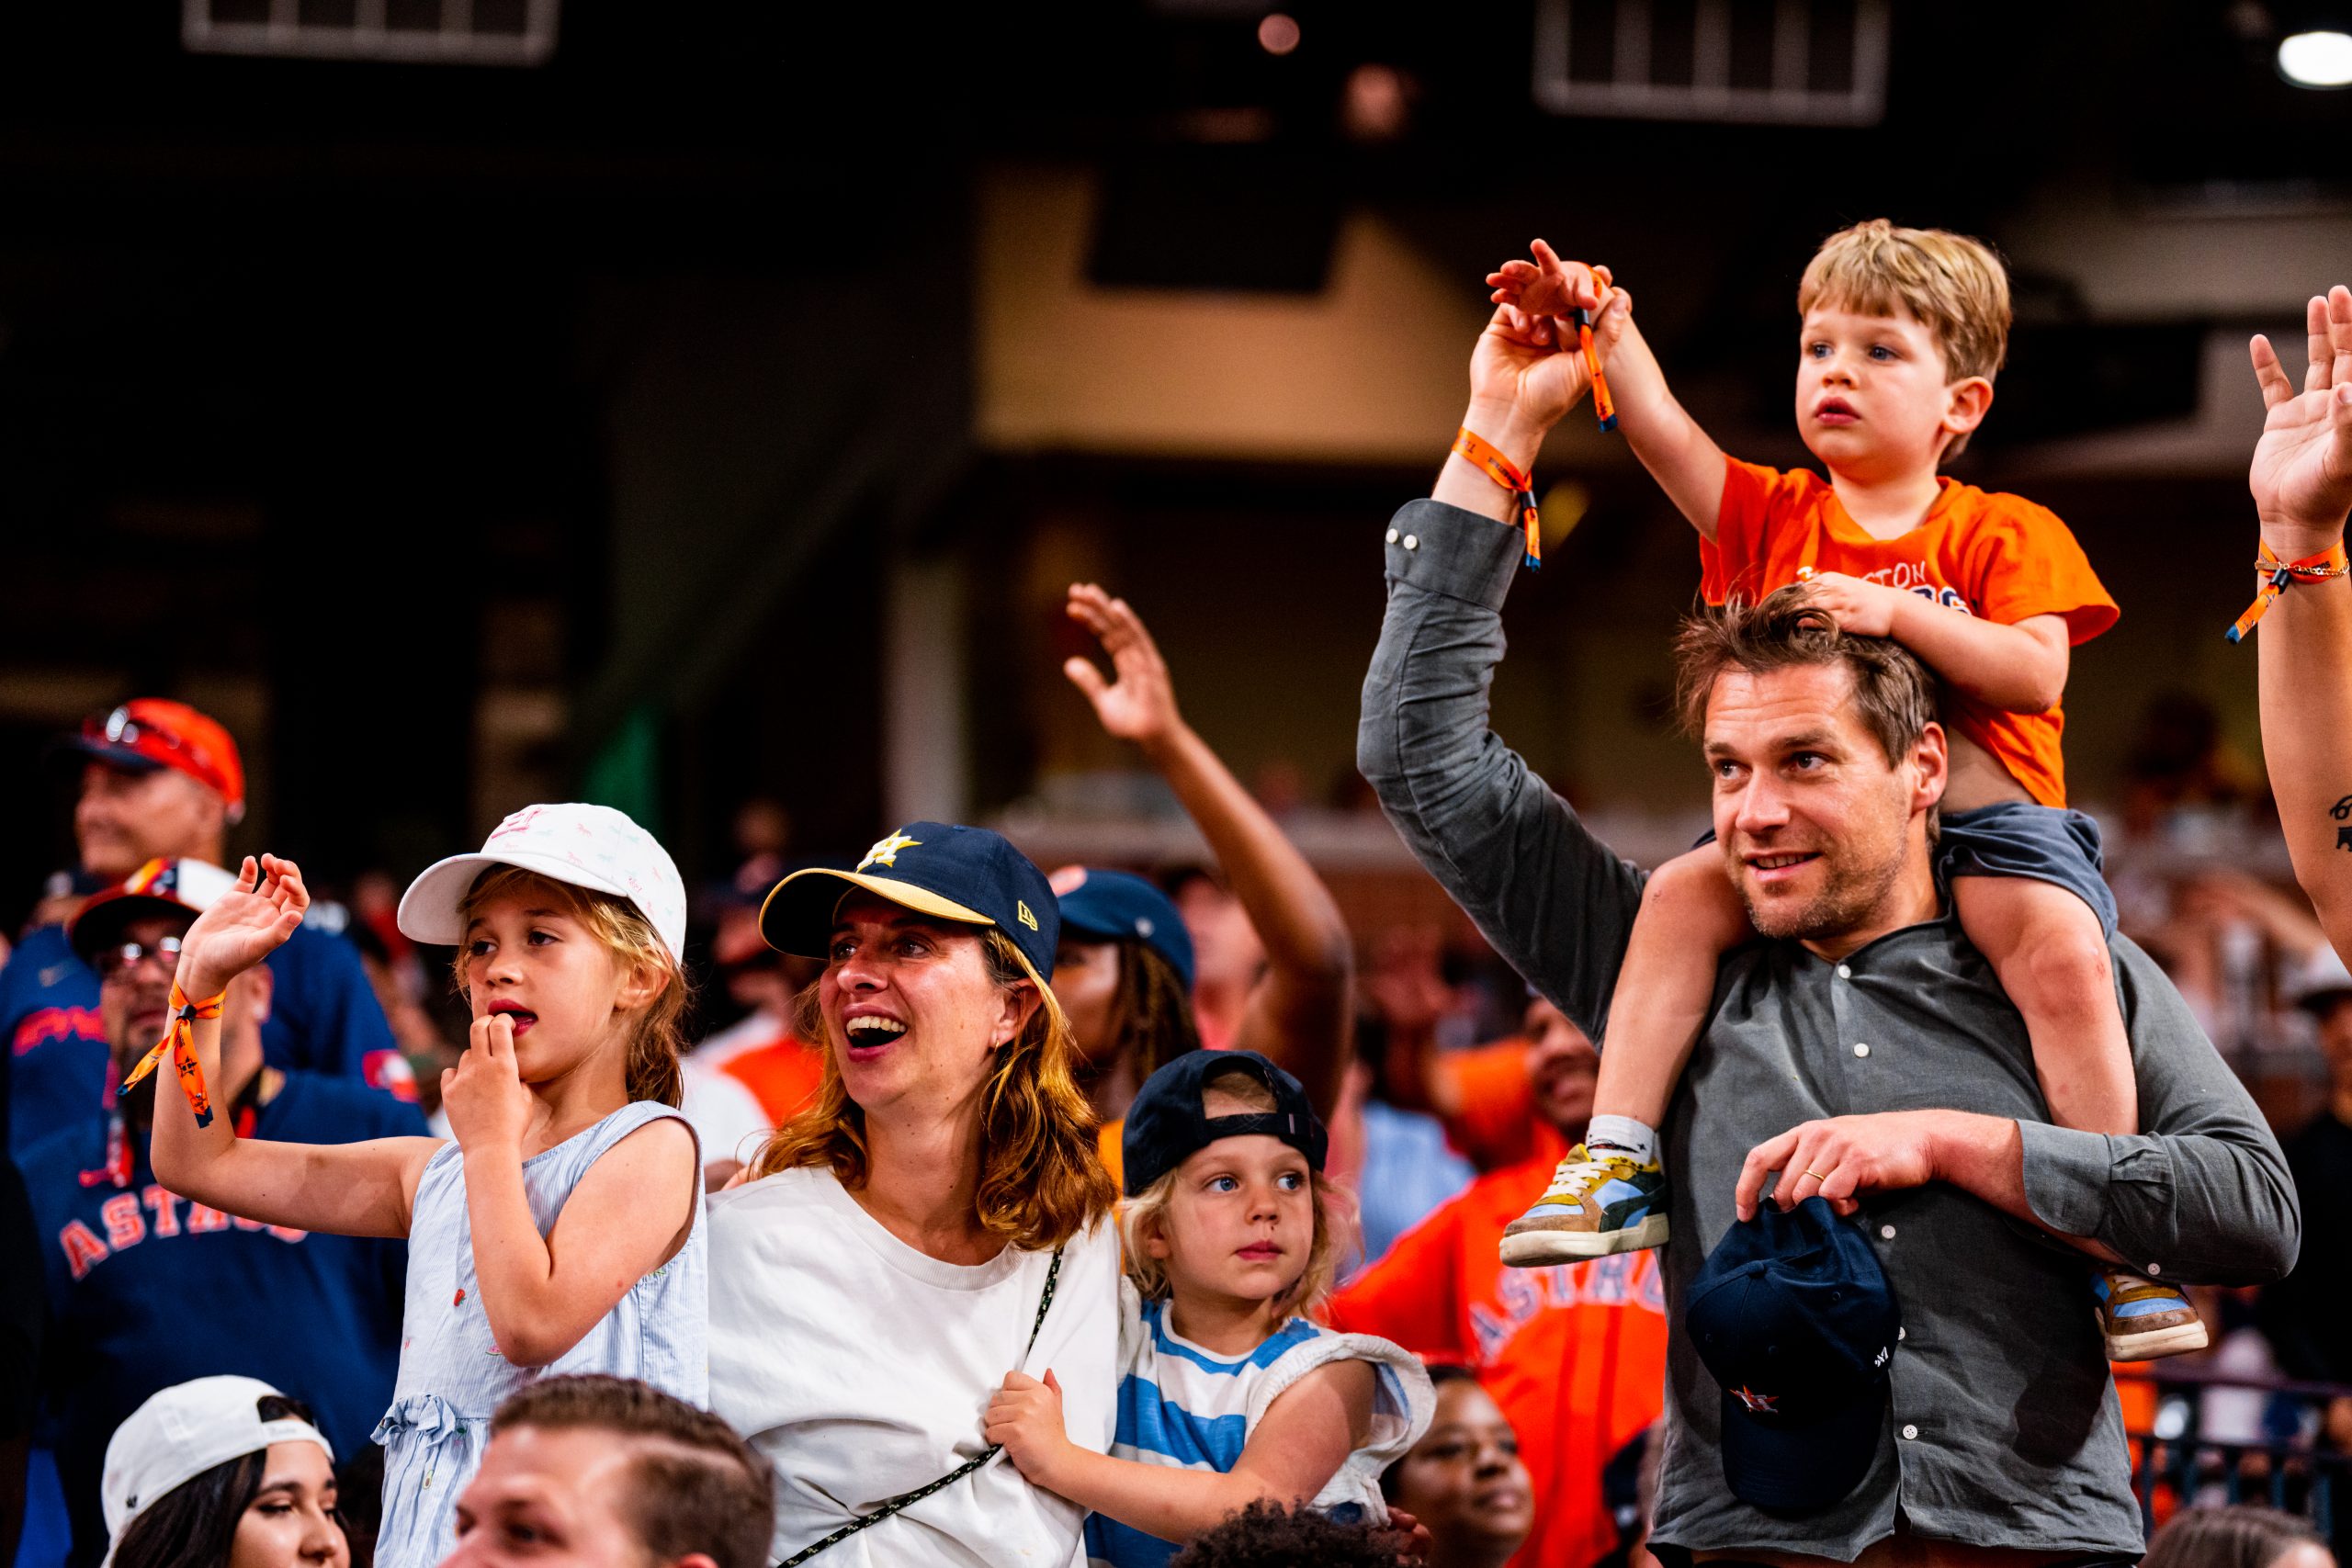 families cheer for the Astros